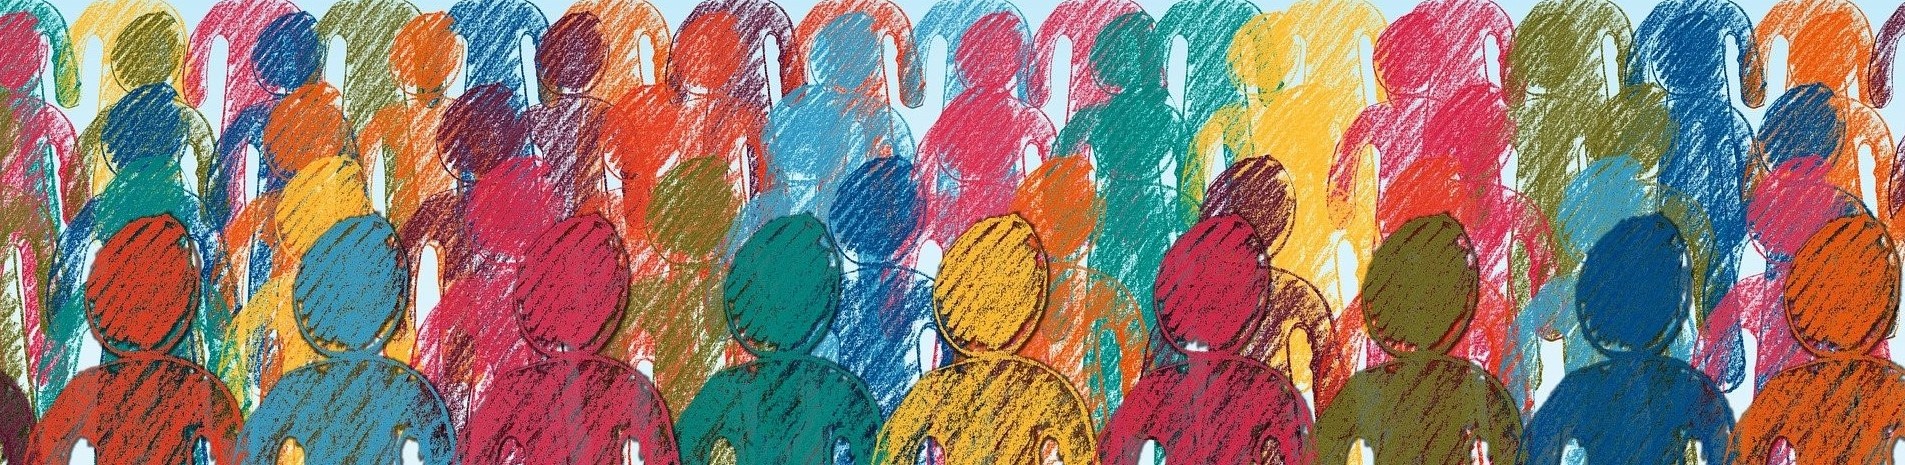 colorful crowd art